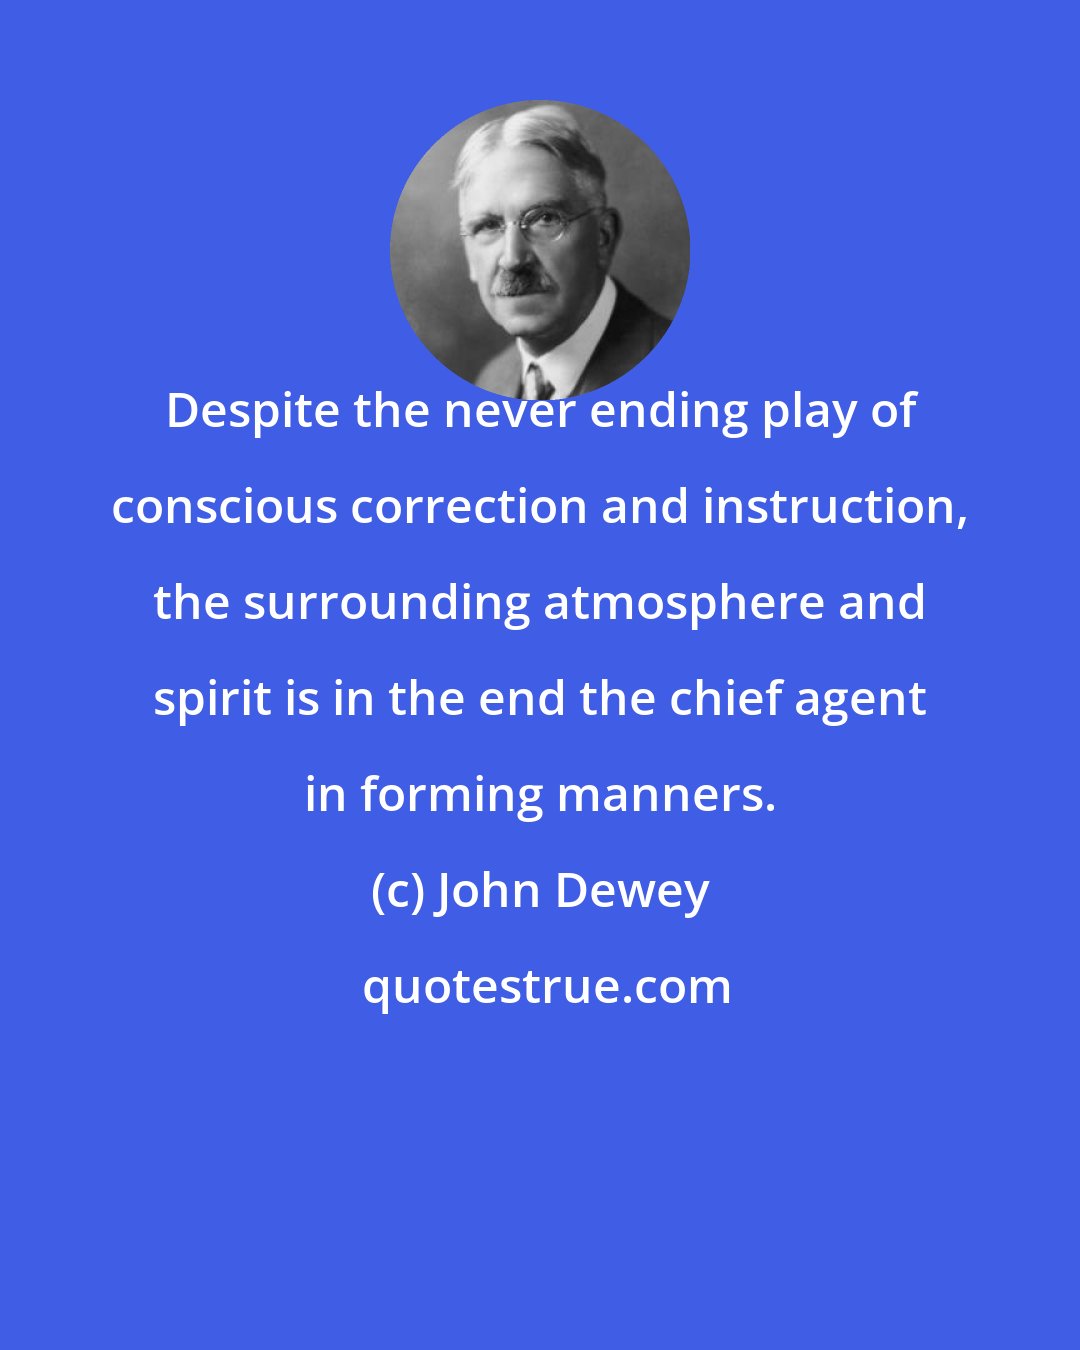 John Dewey: Despite the never ending play of conscious correction and instruction, the surrounding atmosphere and spirit is in the end the chief agent in forming manners.